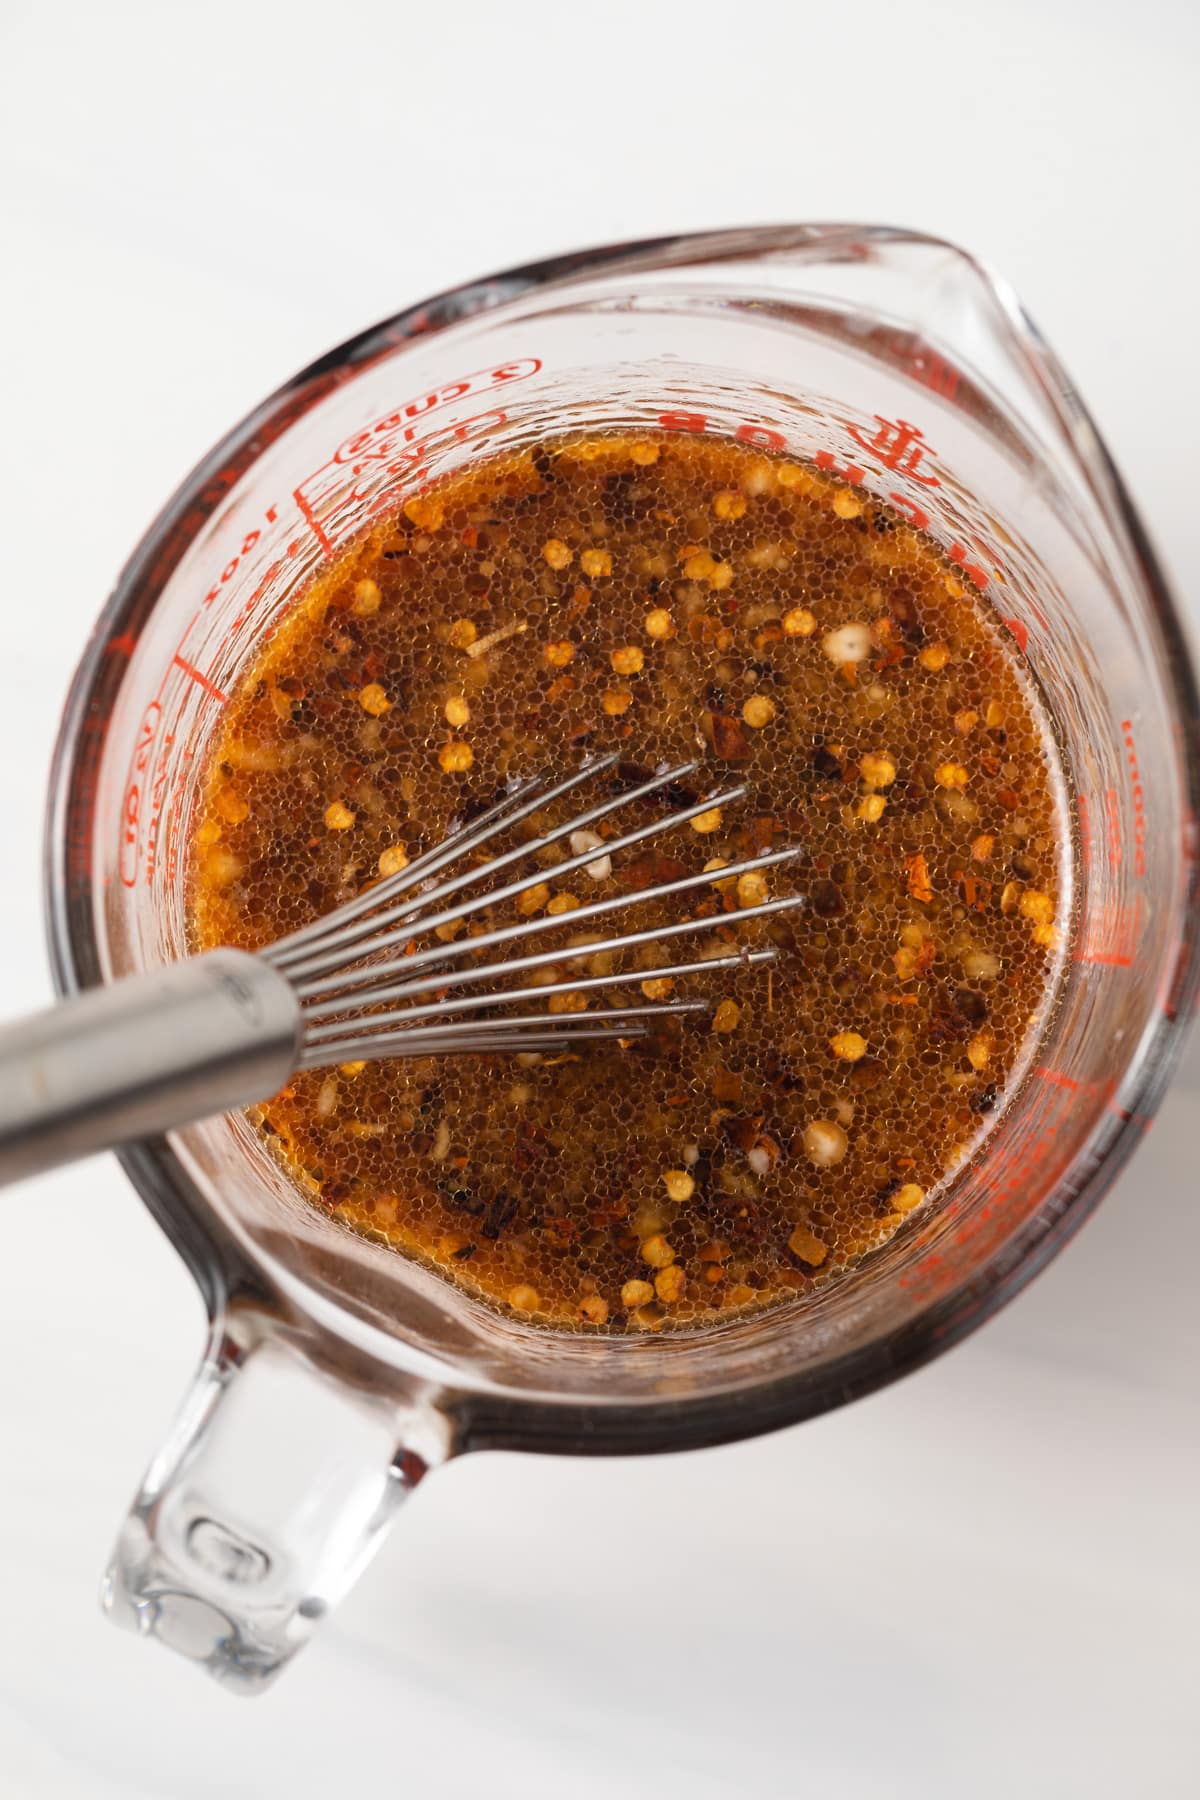 Stir fry sauce in a measuring cup with whisk.